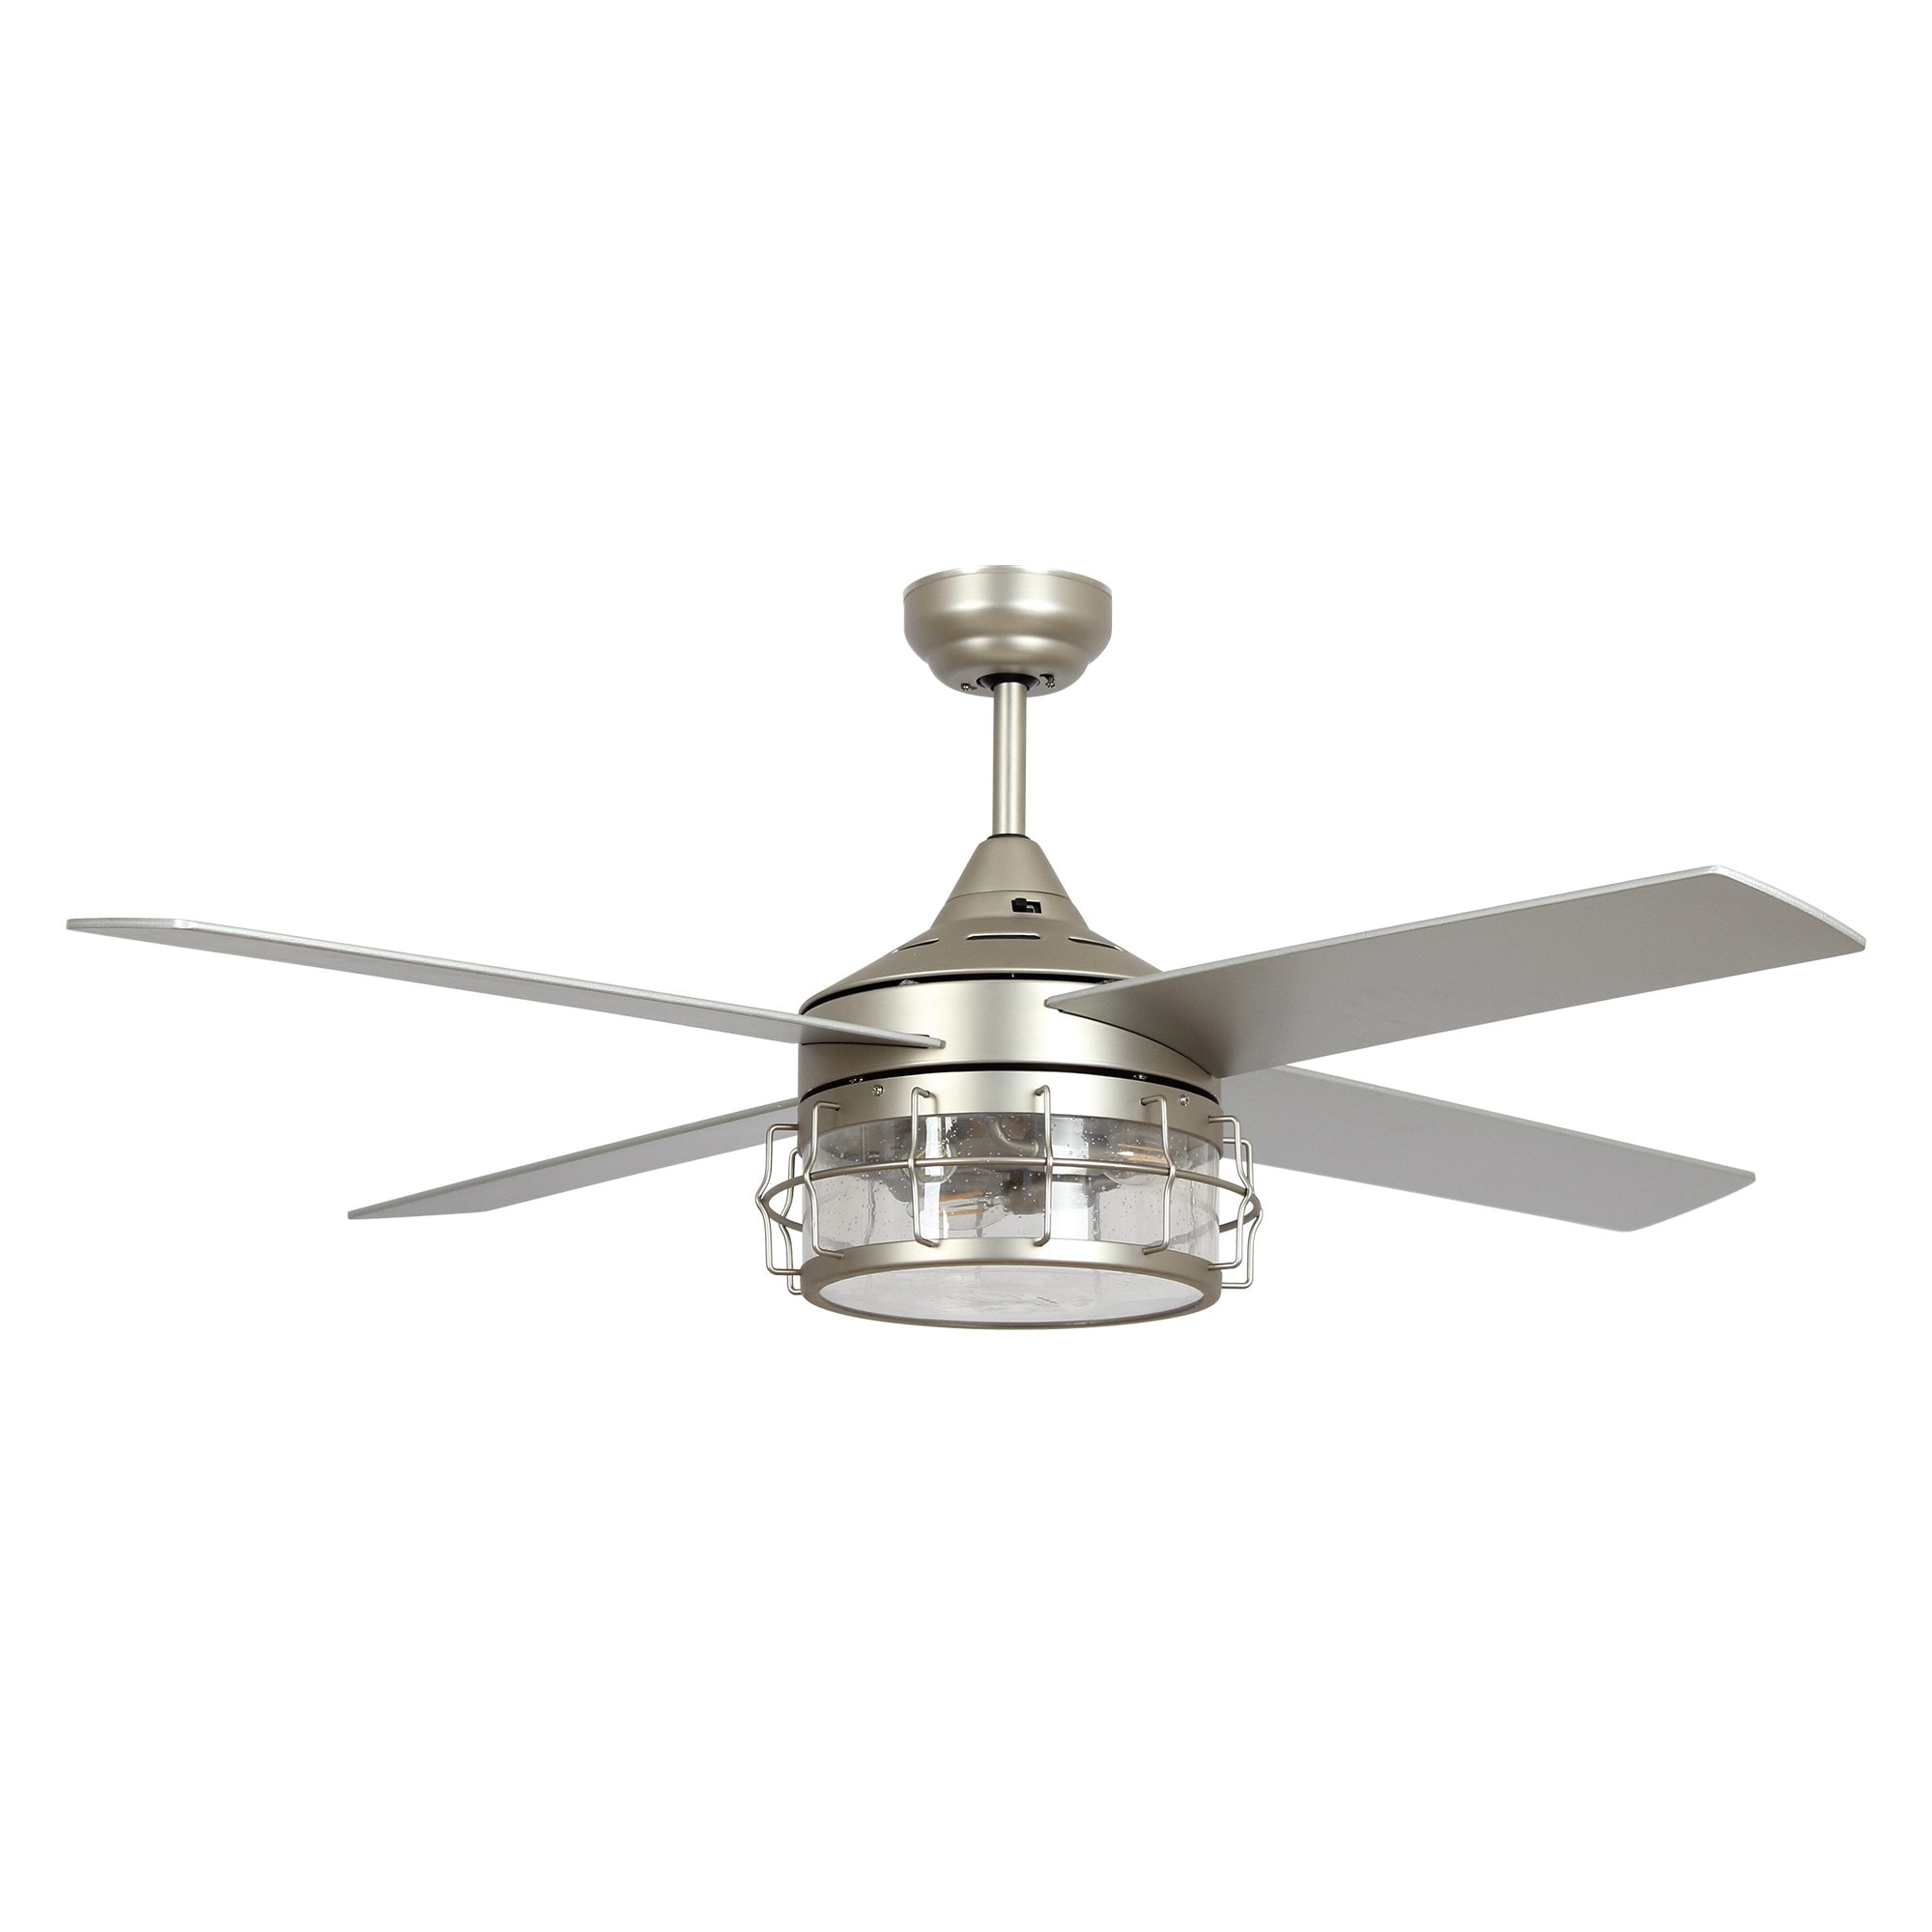 52-inch Modern Satin Nickel 4-blade Glass Shade Ceiling Fan with Remote  52 Inches On Sale Bed Bath  Beyond 33337253